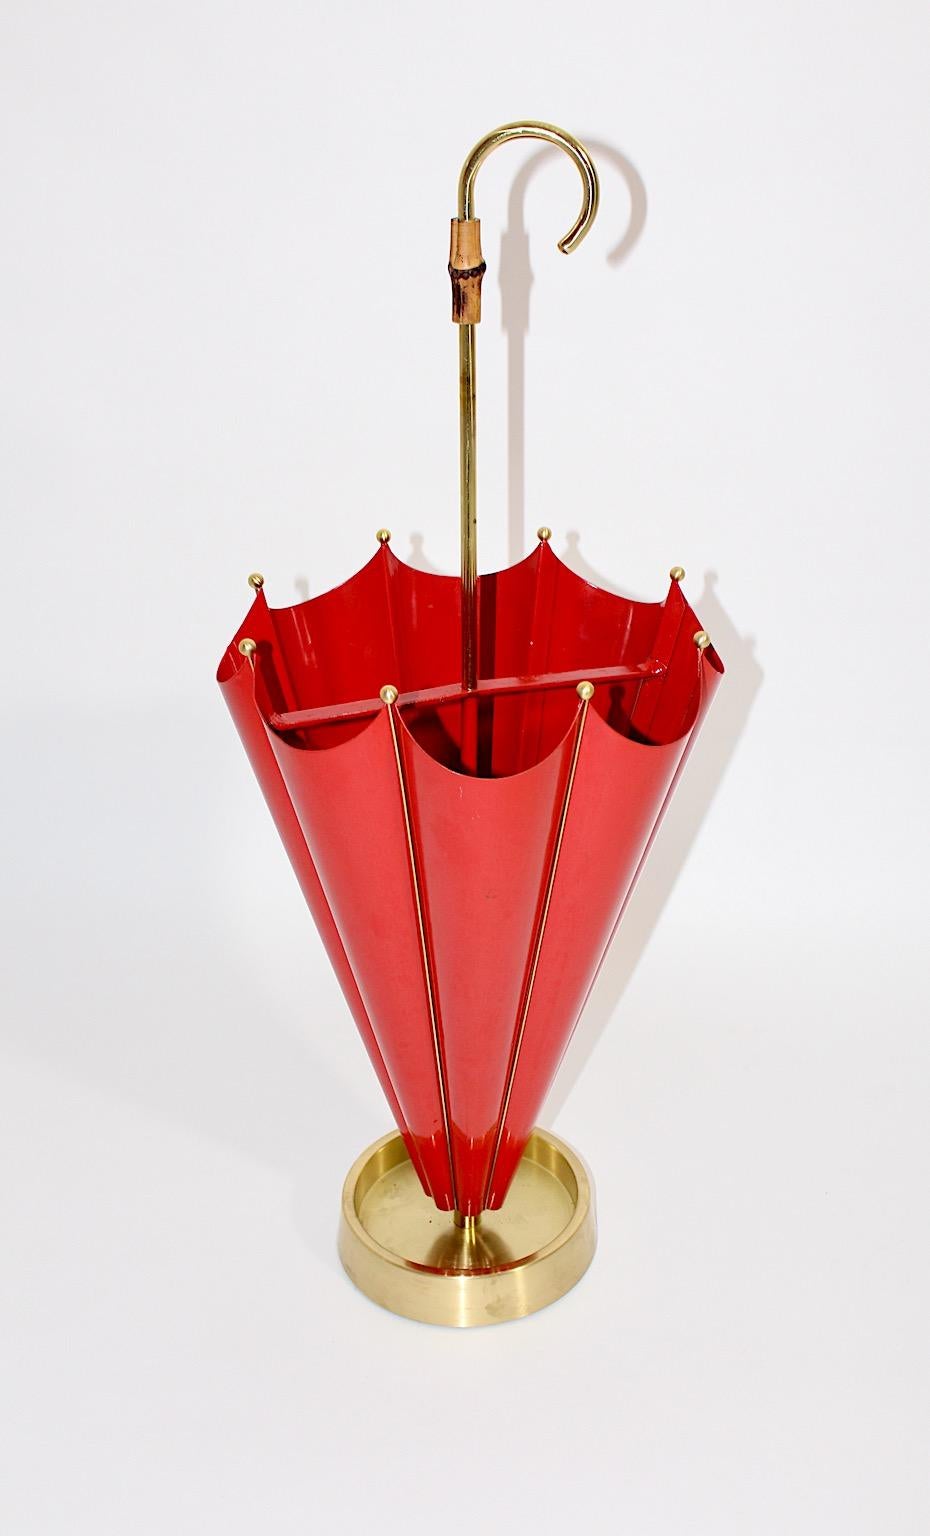 20th Century Mid-Century Modern Vintage Red Metal Brass Umbrella Stand Cane Holder 1950 Italy For Sale